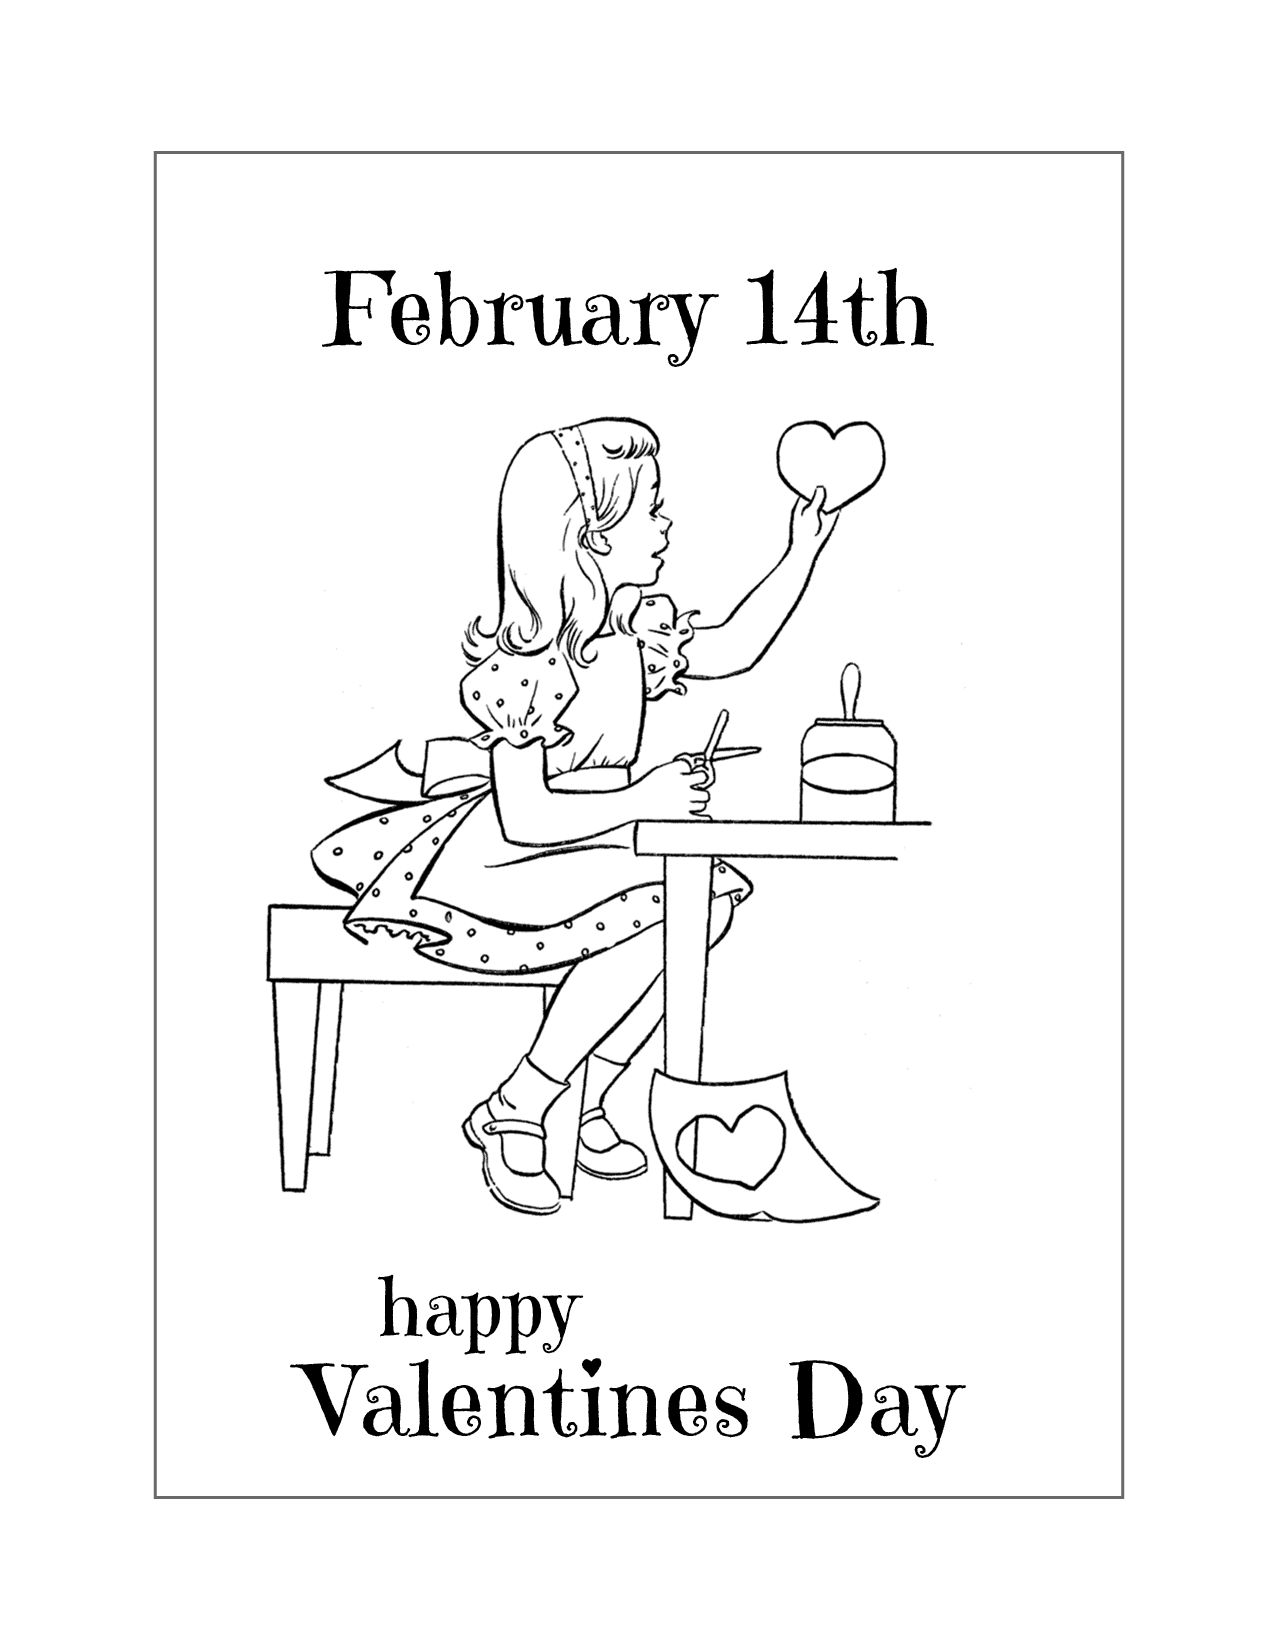 February 14 Valentines Day Coloring Page